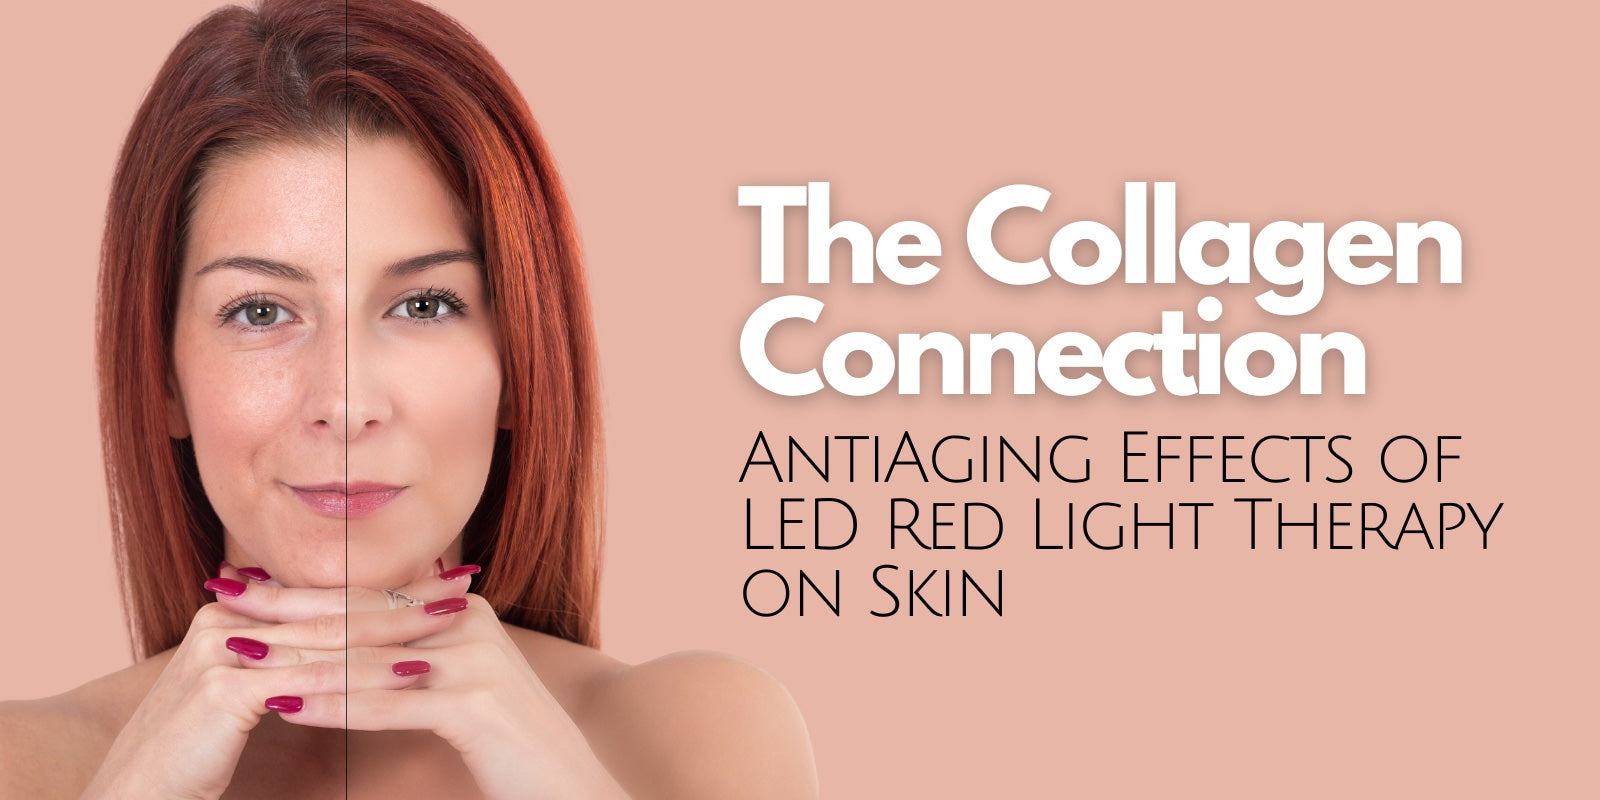 the collagen connection. AntiAging effects of LED red light therapy on skin